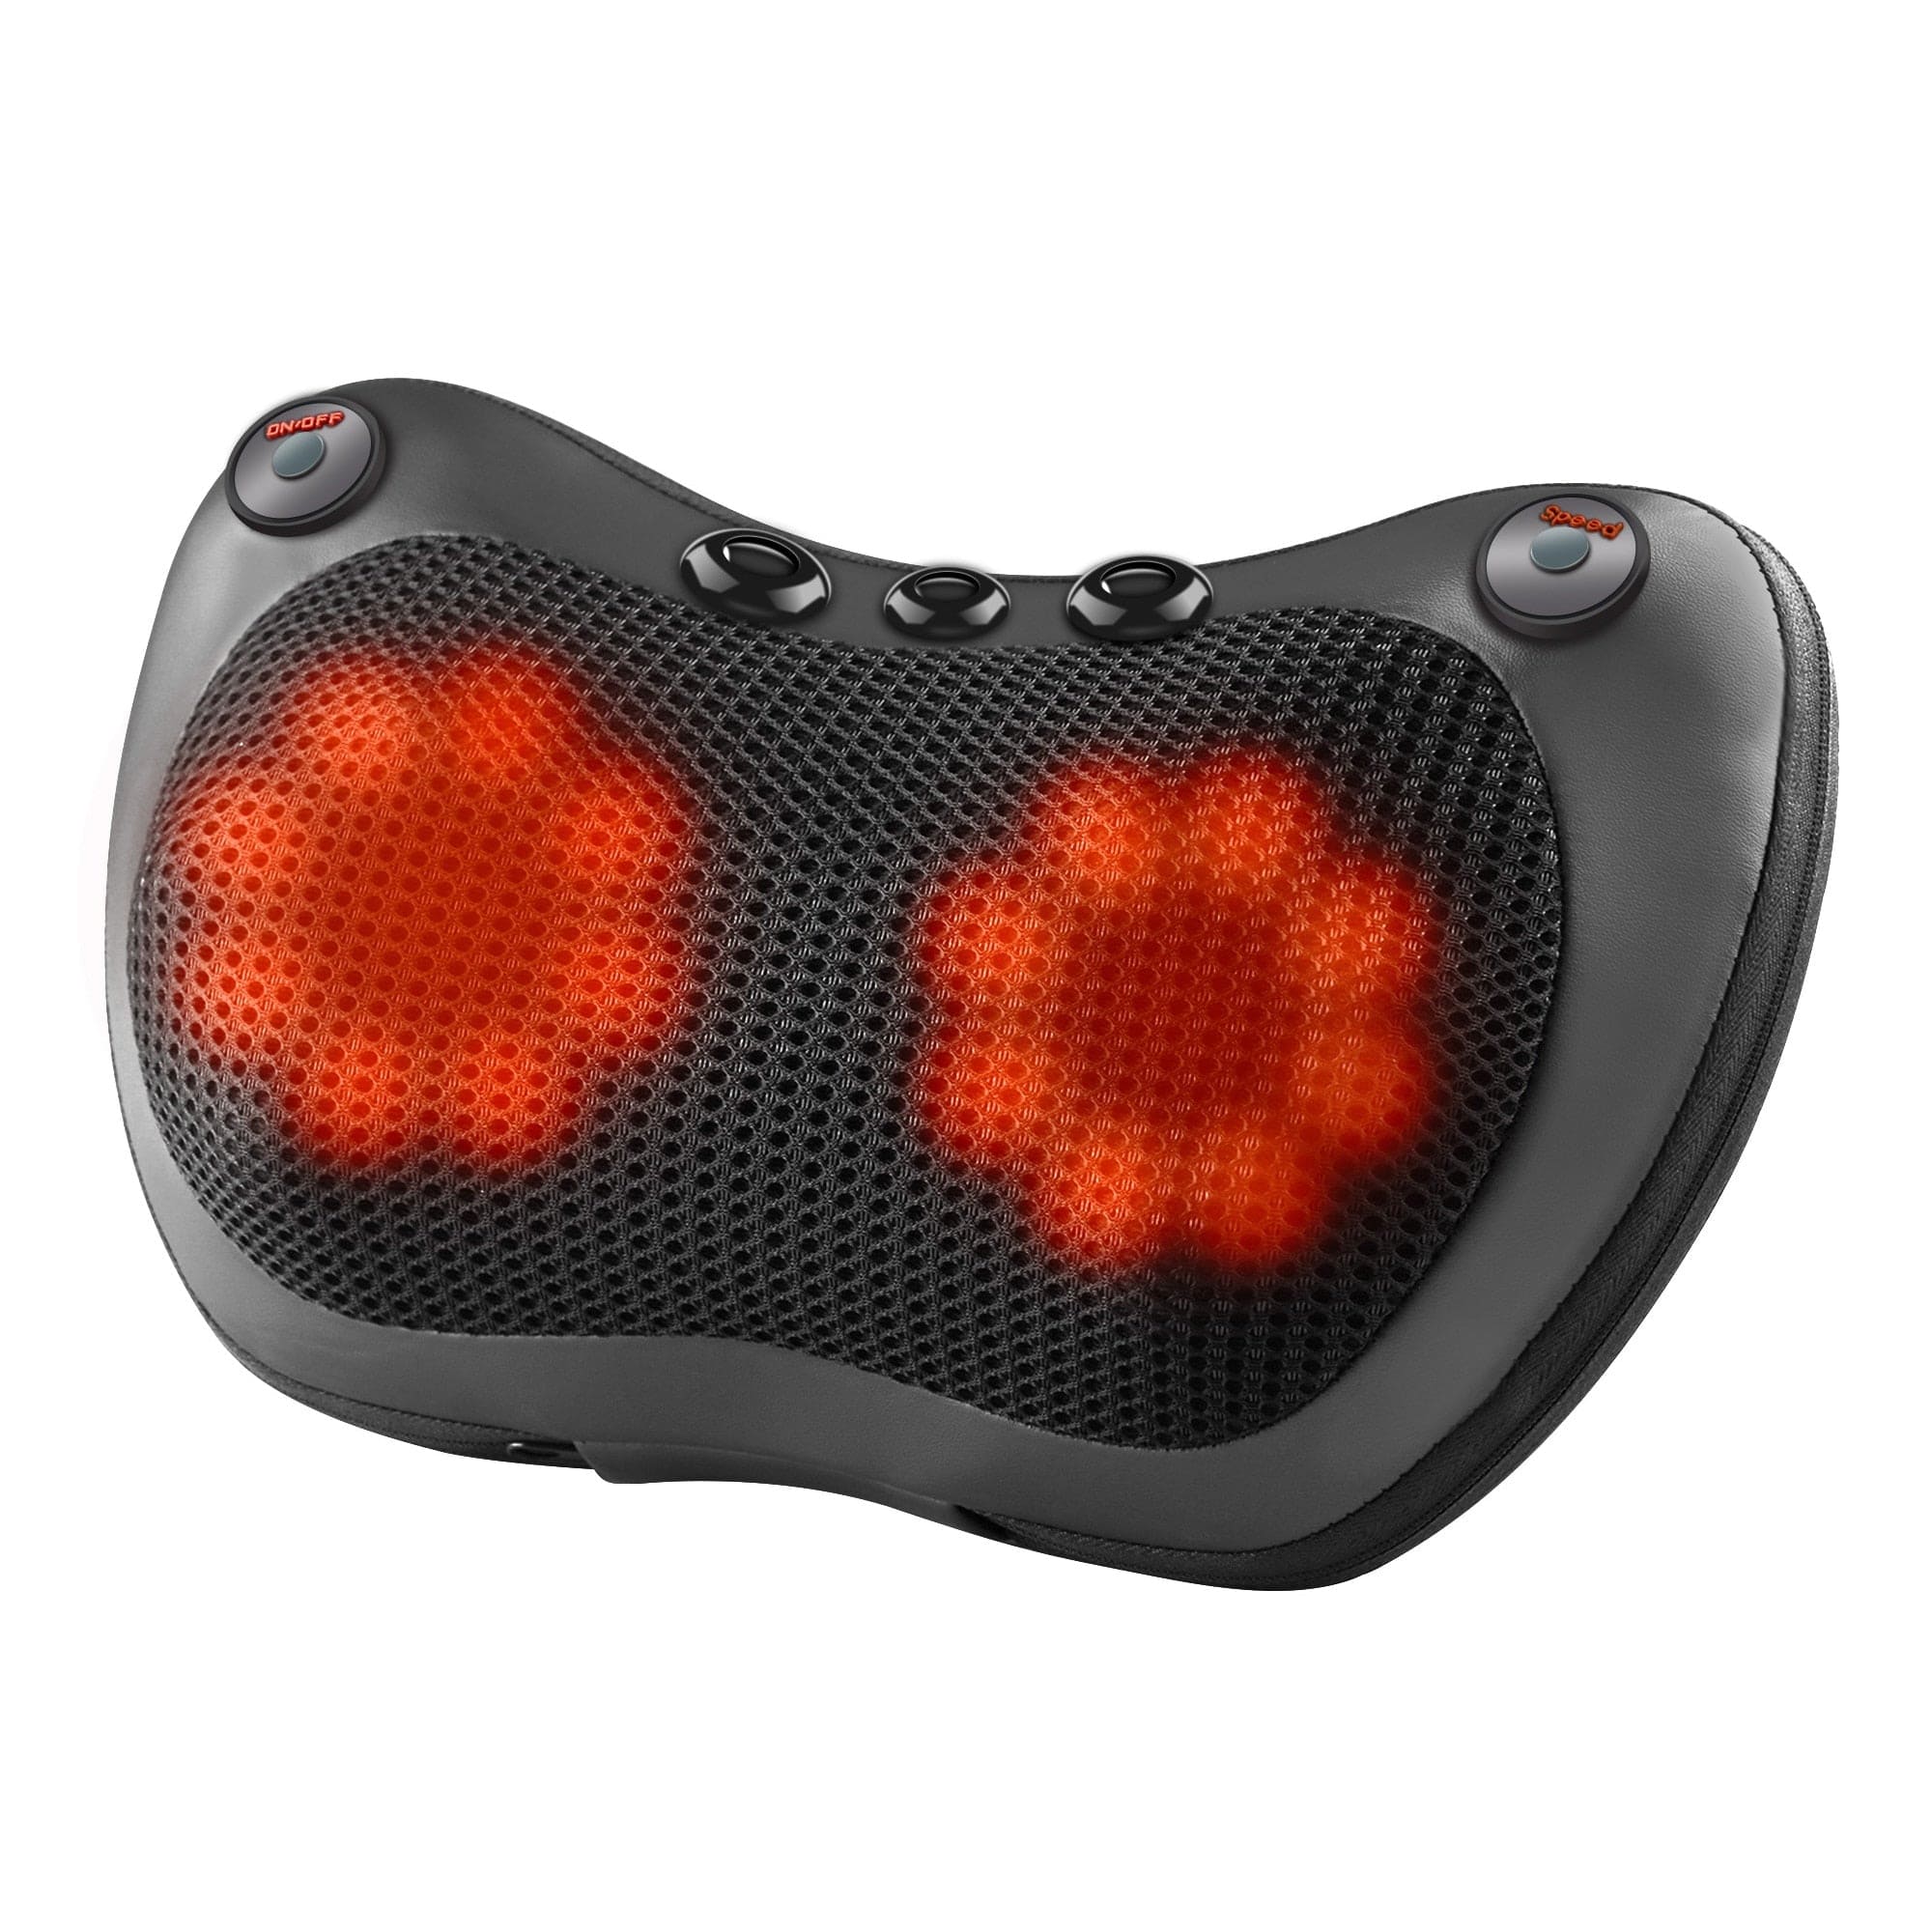 "Multifunctional Electric Massage Pillow Cushion for Head, Neck, Back, Waist, and Body - Ideal for Car and Home Use" - Comfortable Neck and Body Massager online | Shop Now!